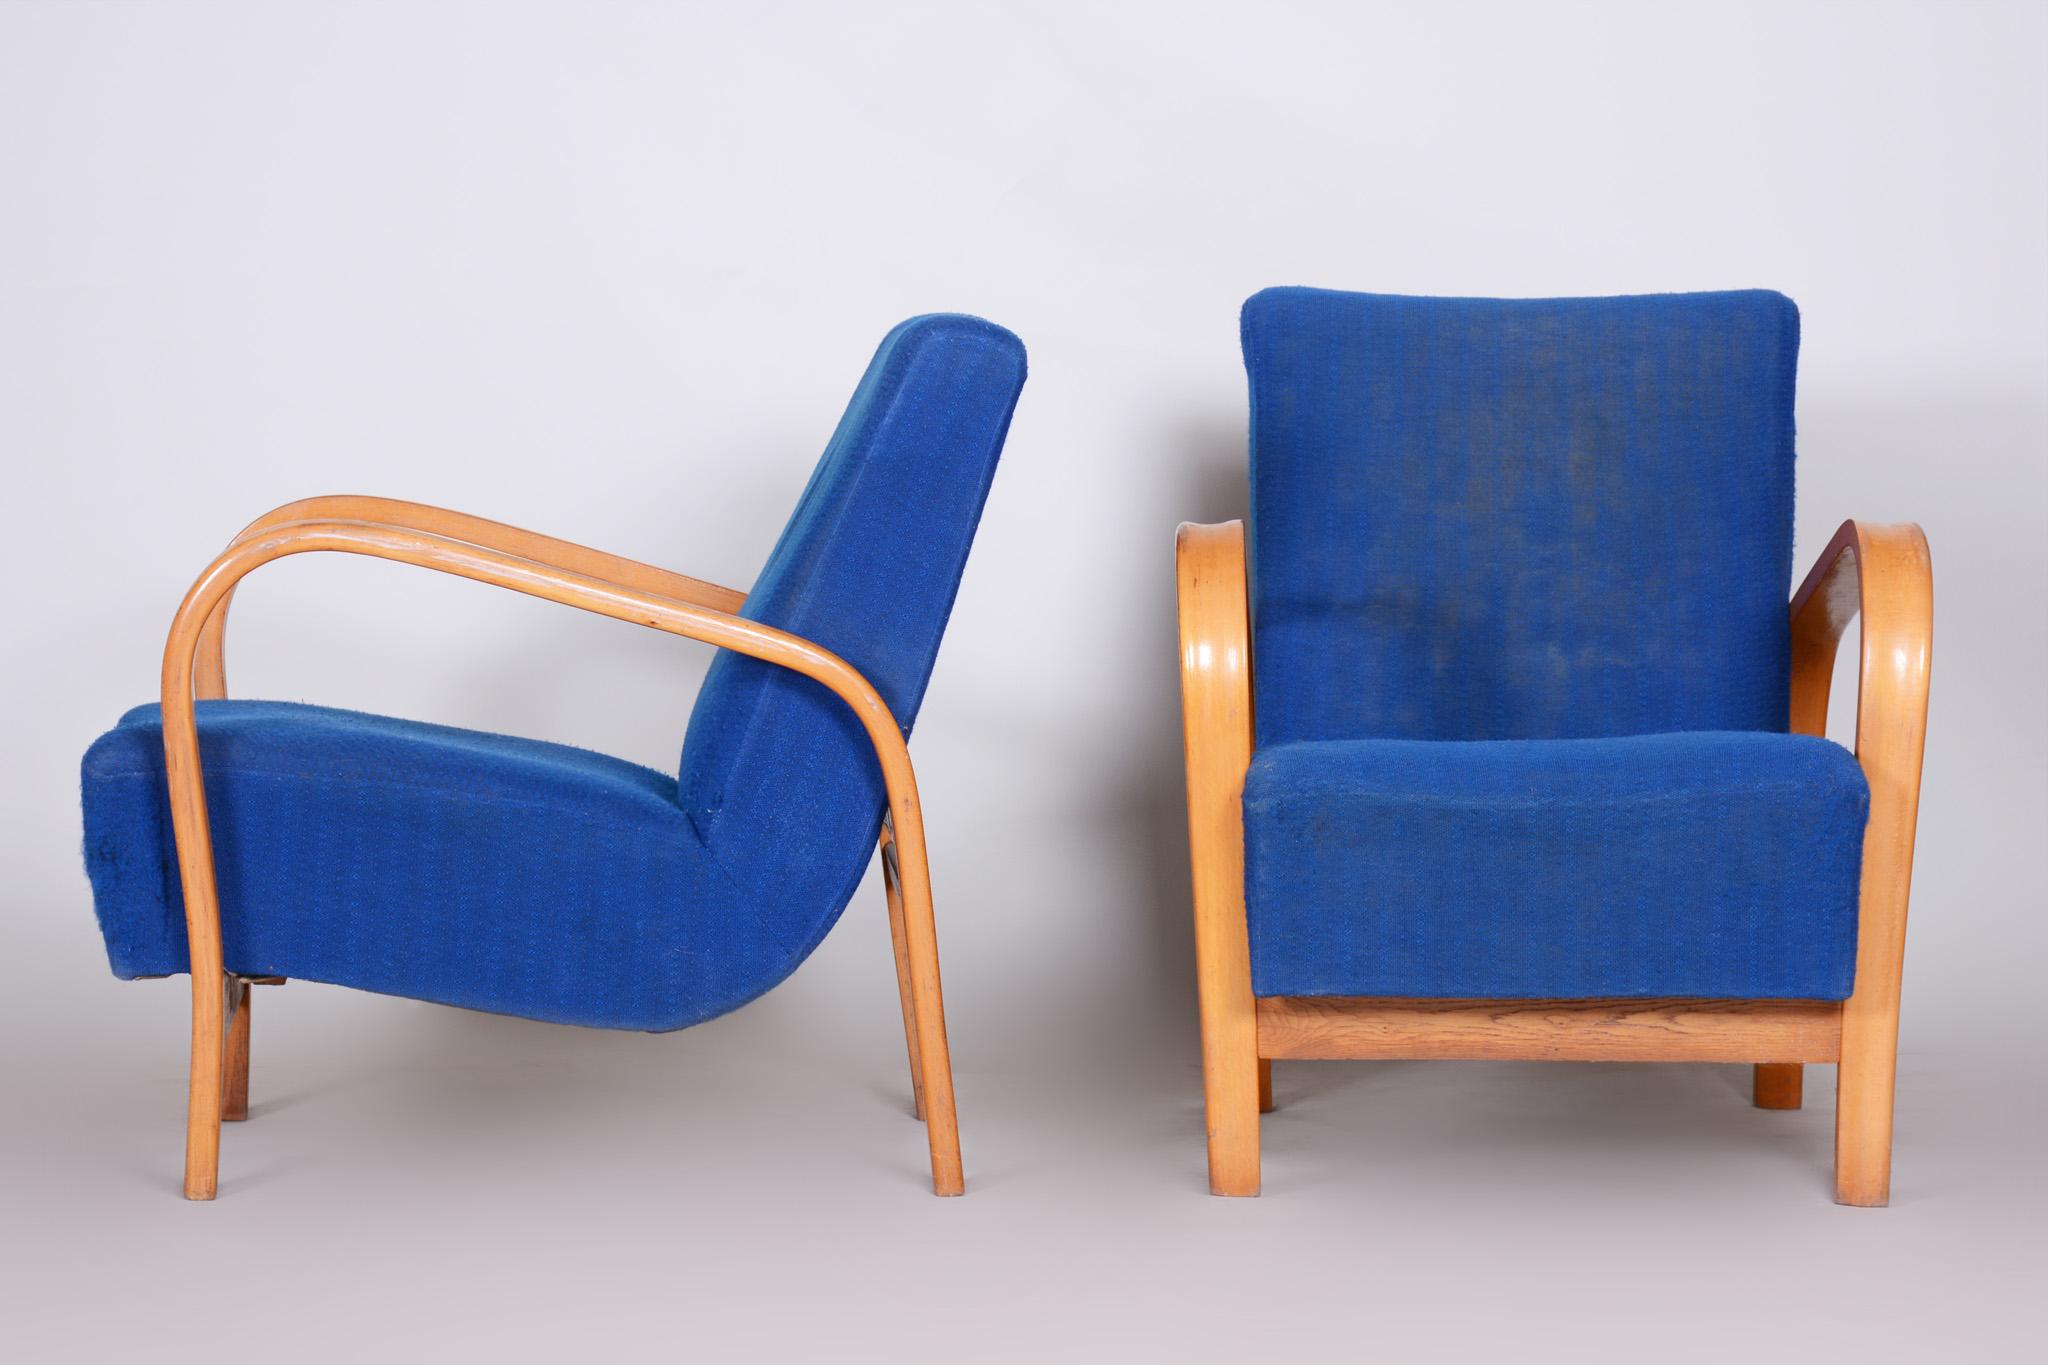 Fabric Pair of Mid Century Armchairs Made in Czechia 1930s, Collaboration with Halabala